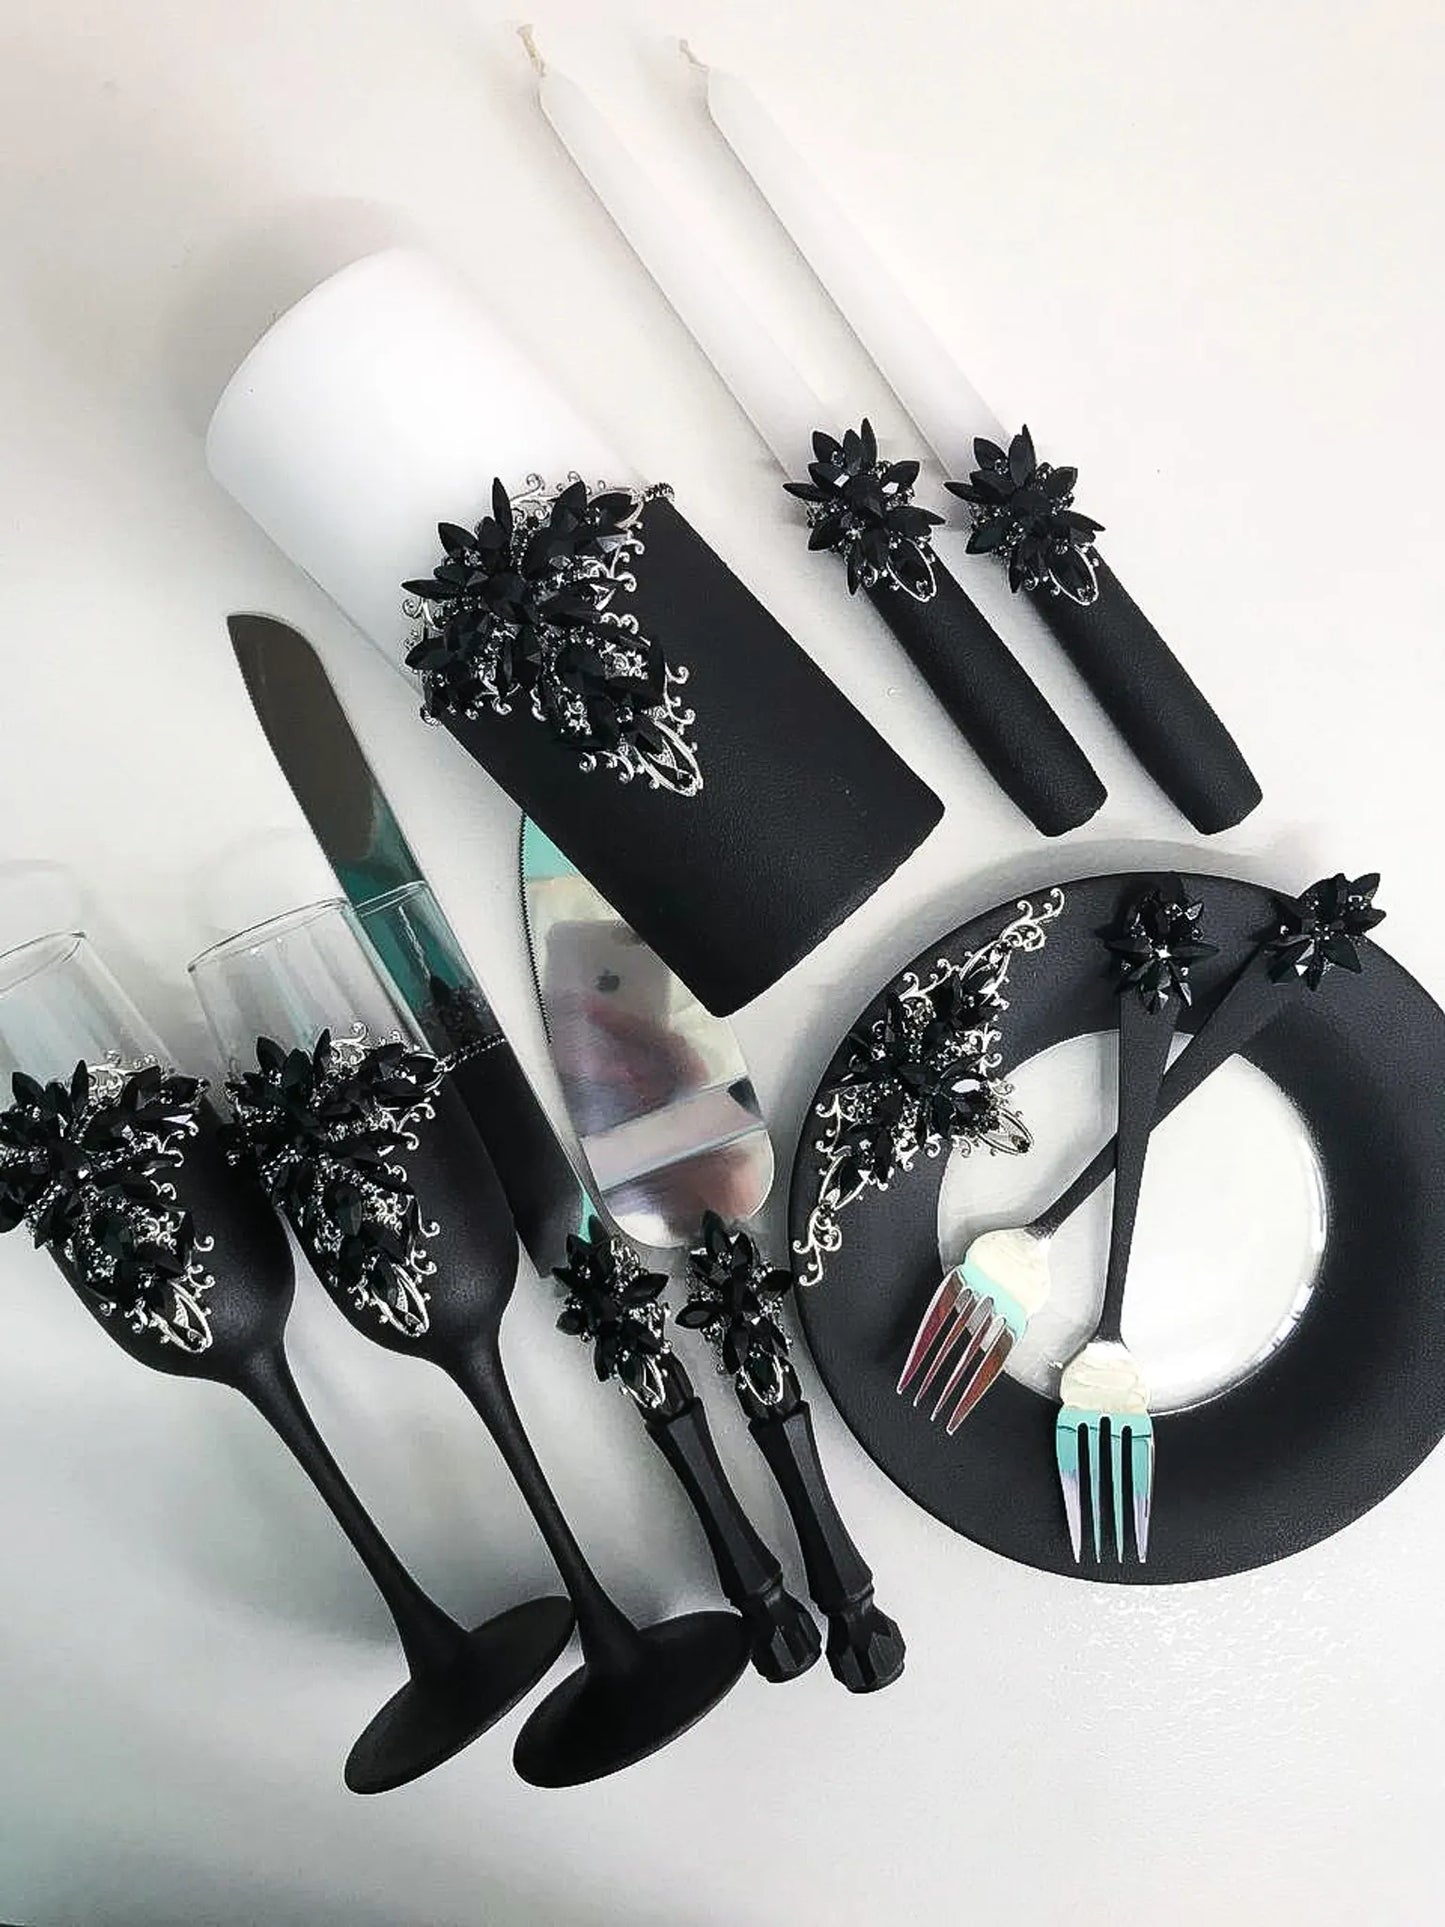 Elegant Gothic Black Crystals Wedding Cake Plate and Fork Set - Gloria Collection